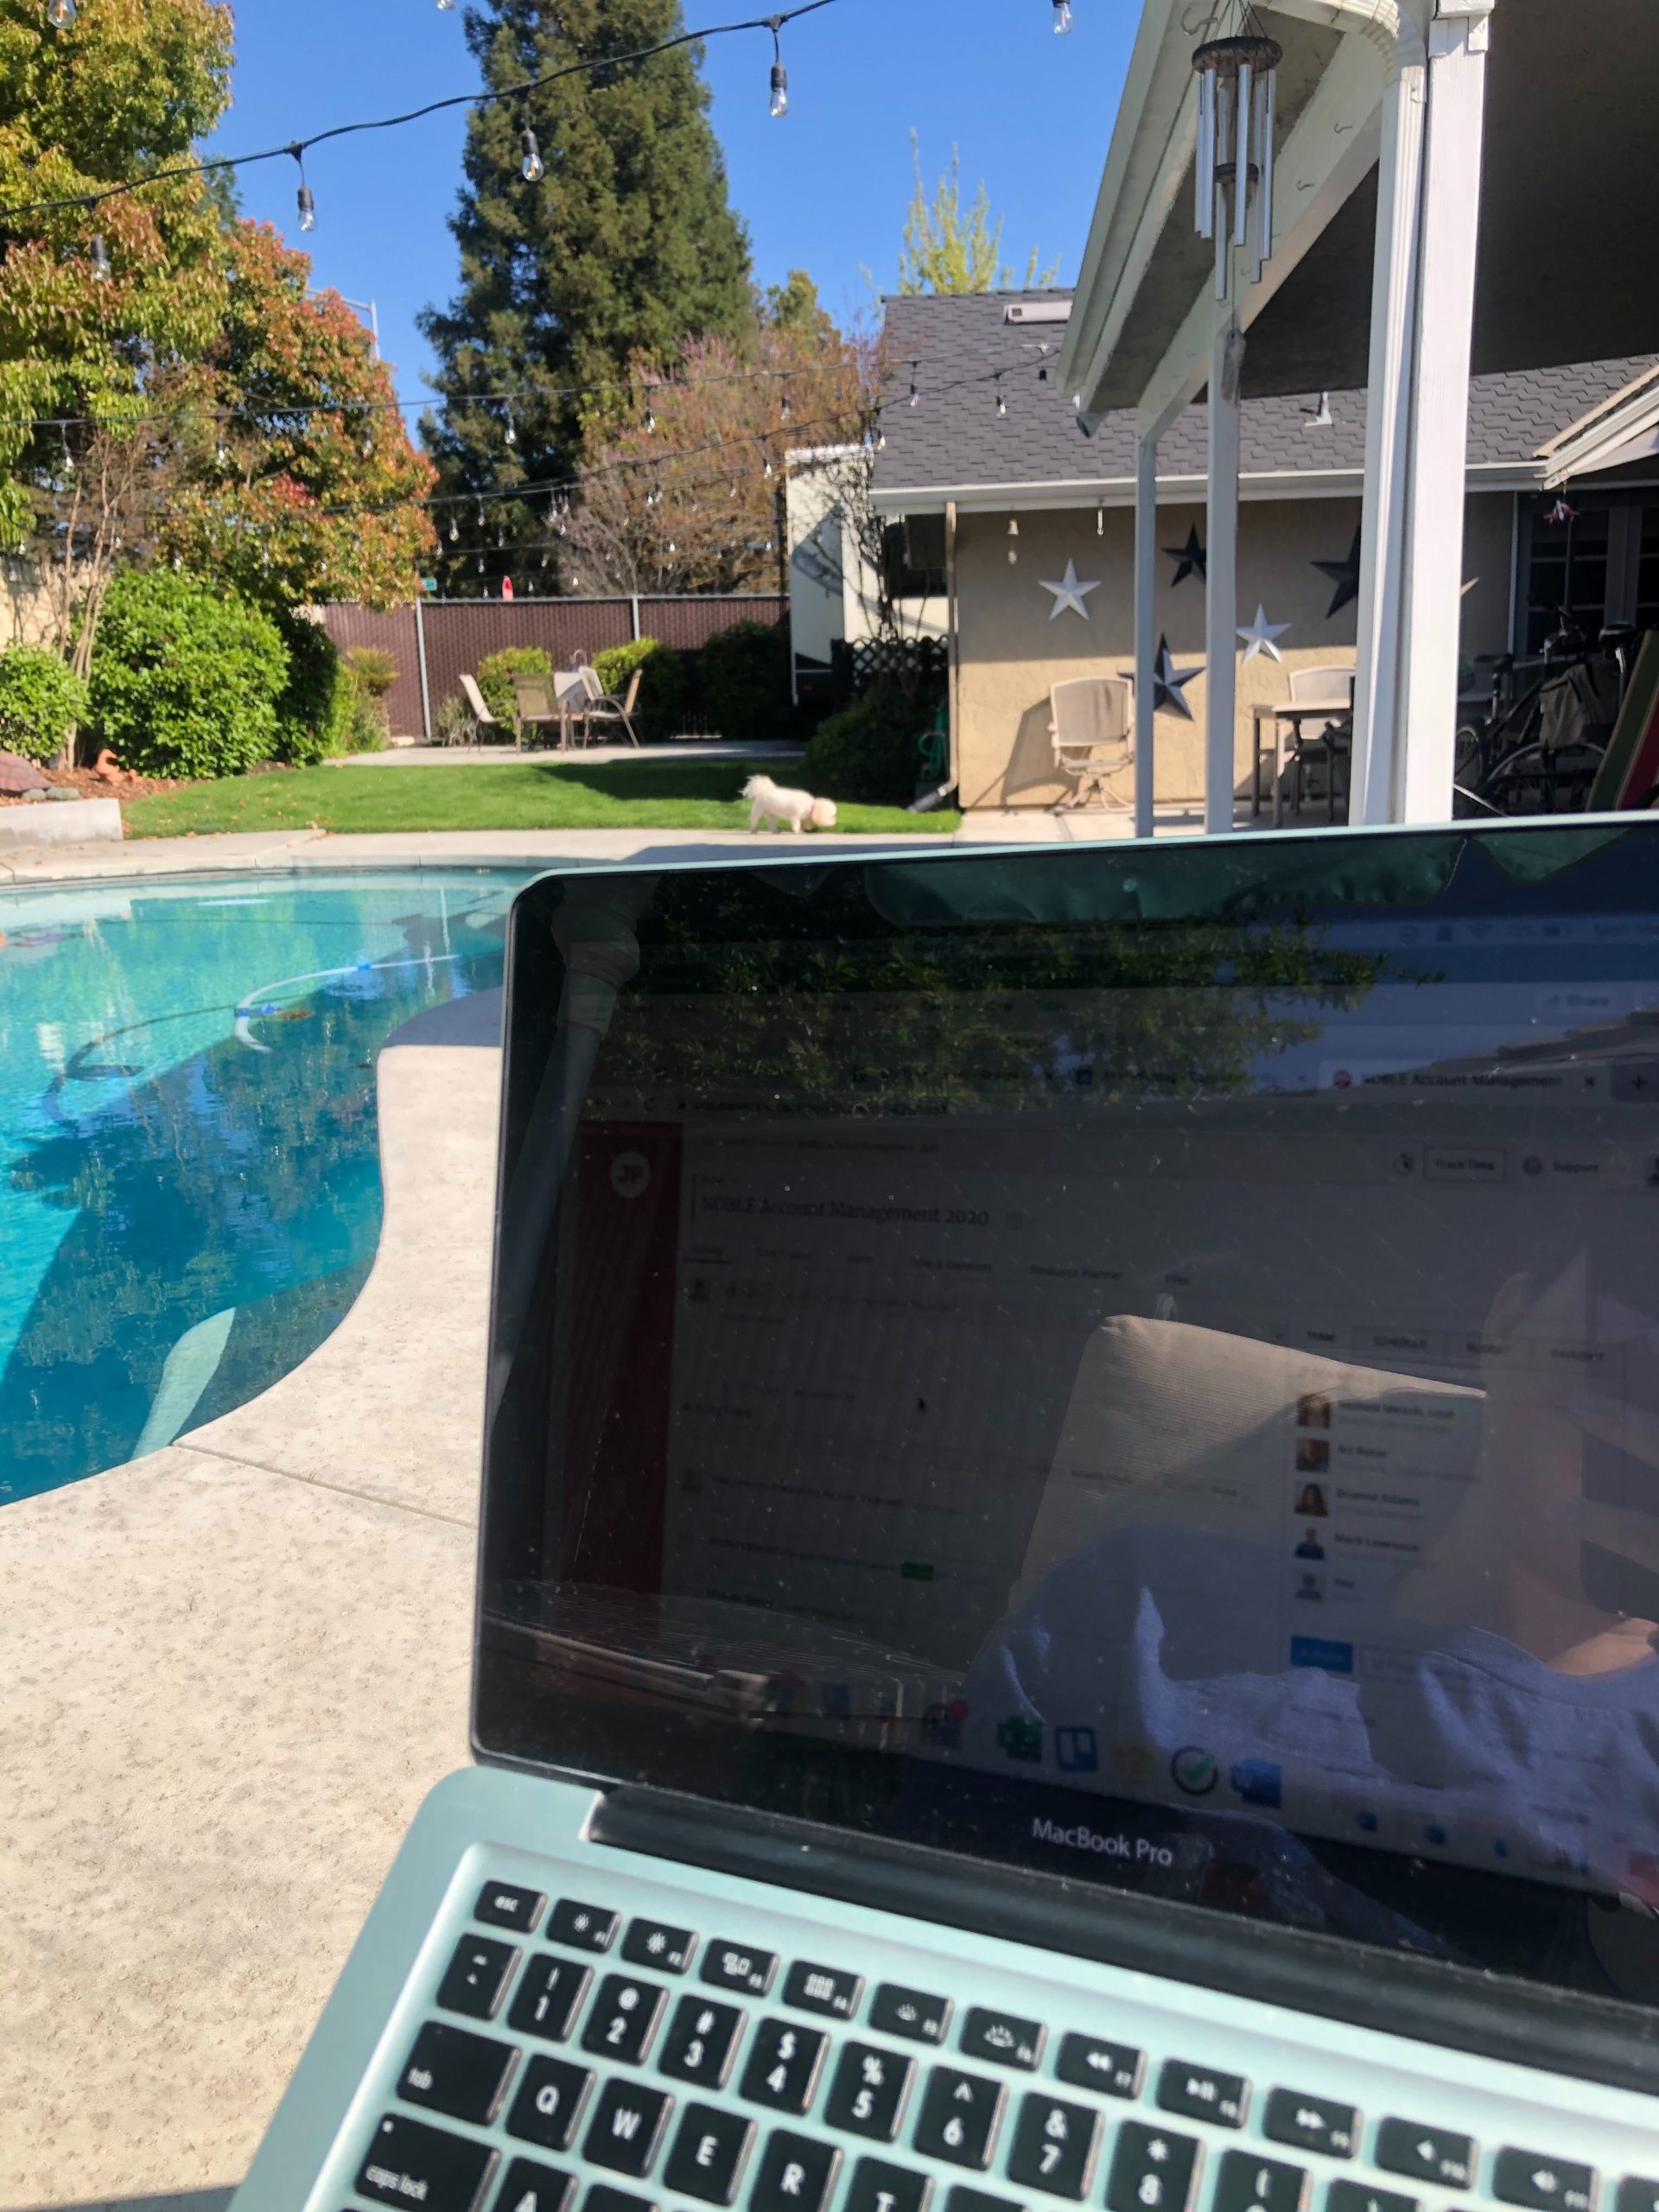 Shaeley's home office by the pool